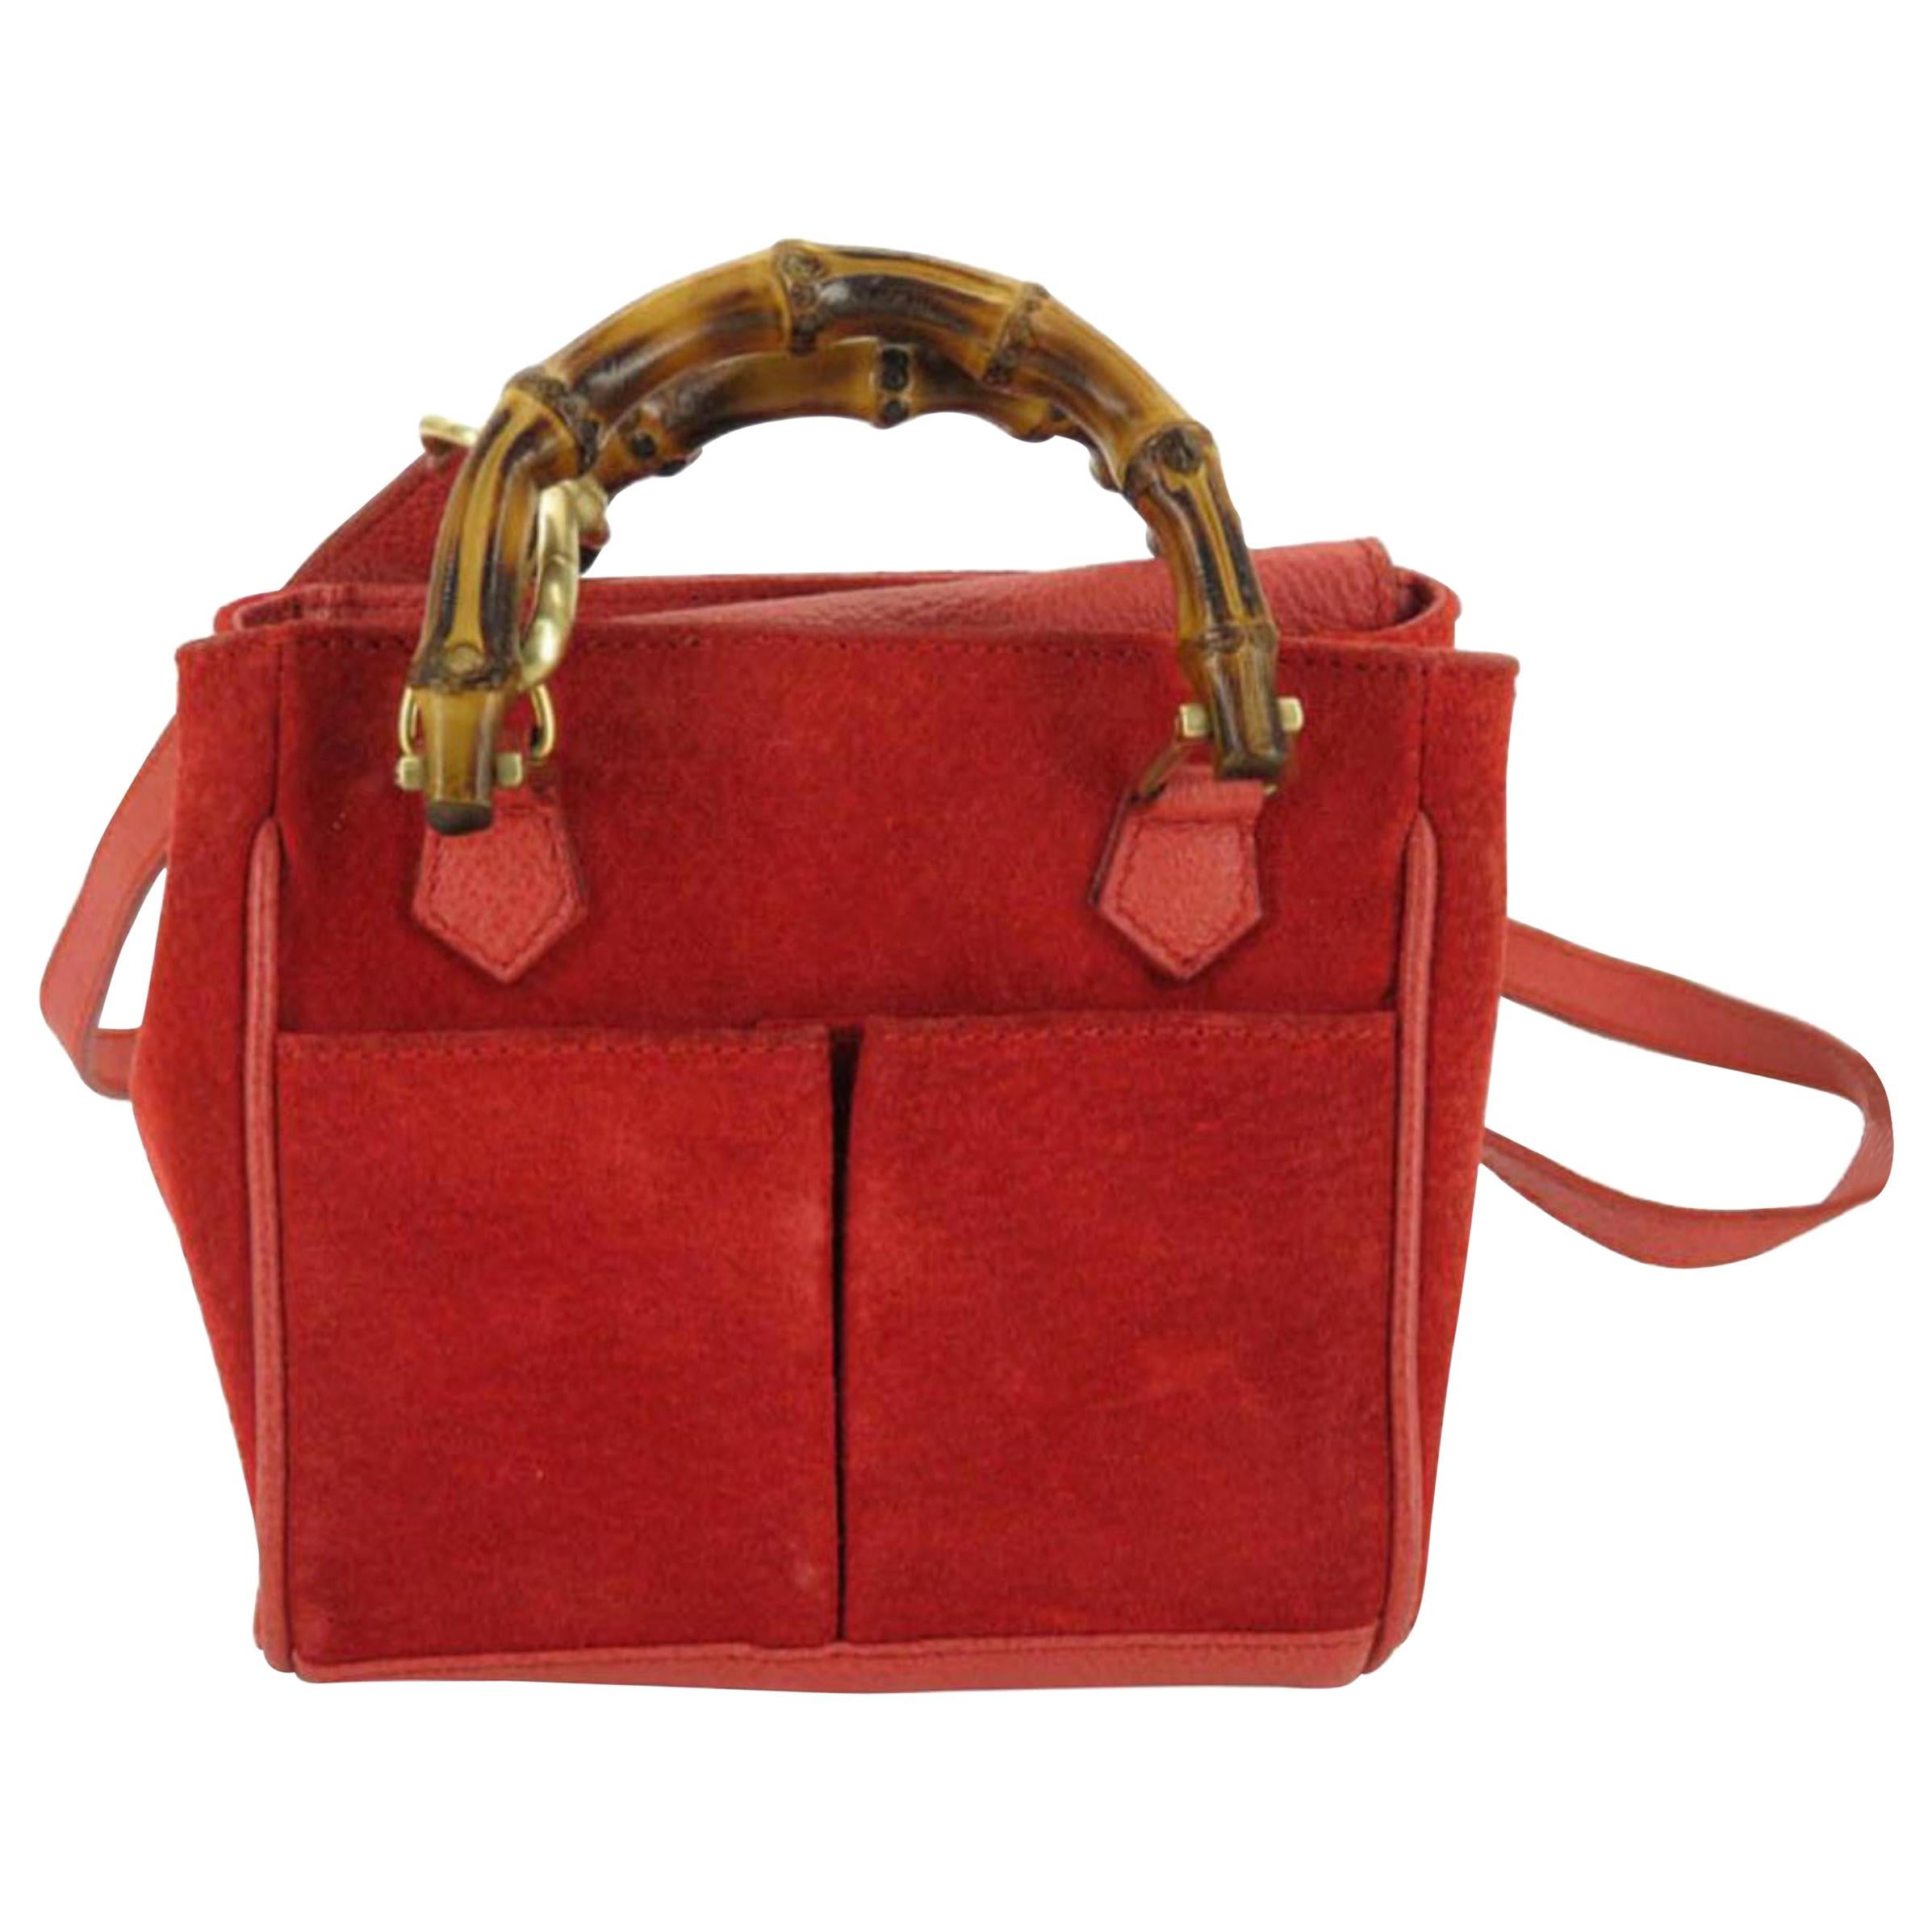 Gucci 2way Bamboo Shopper Tote 870304 Red Suede Leather Satchel For Sale